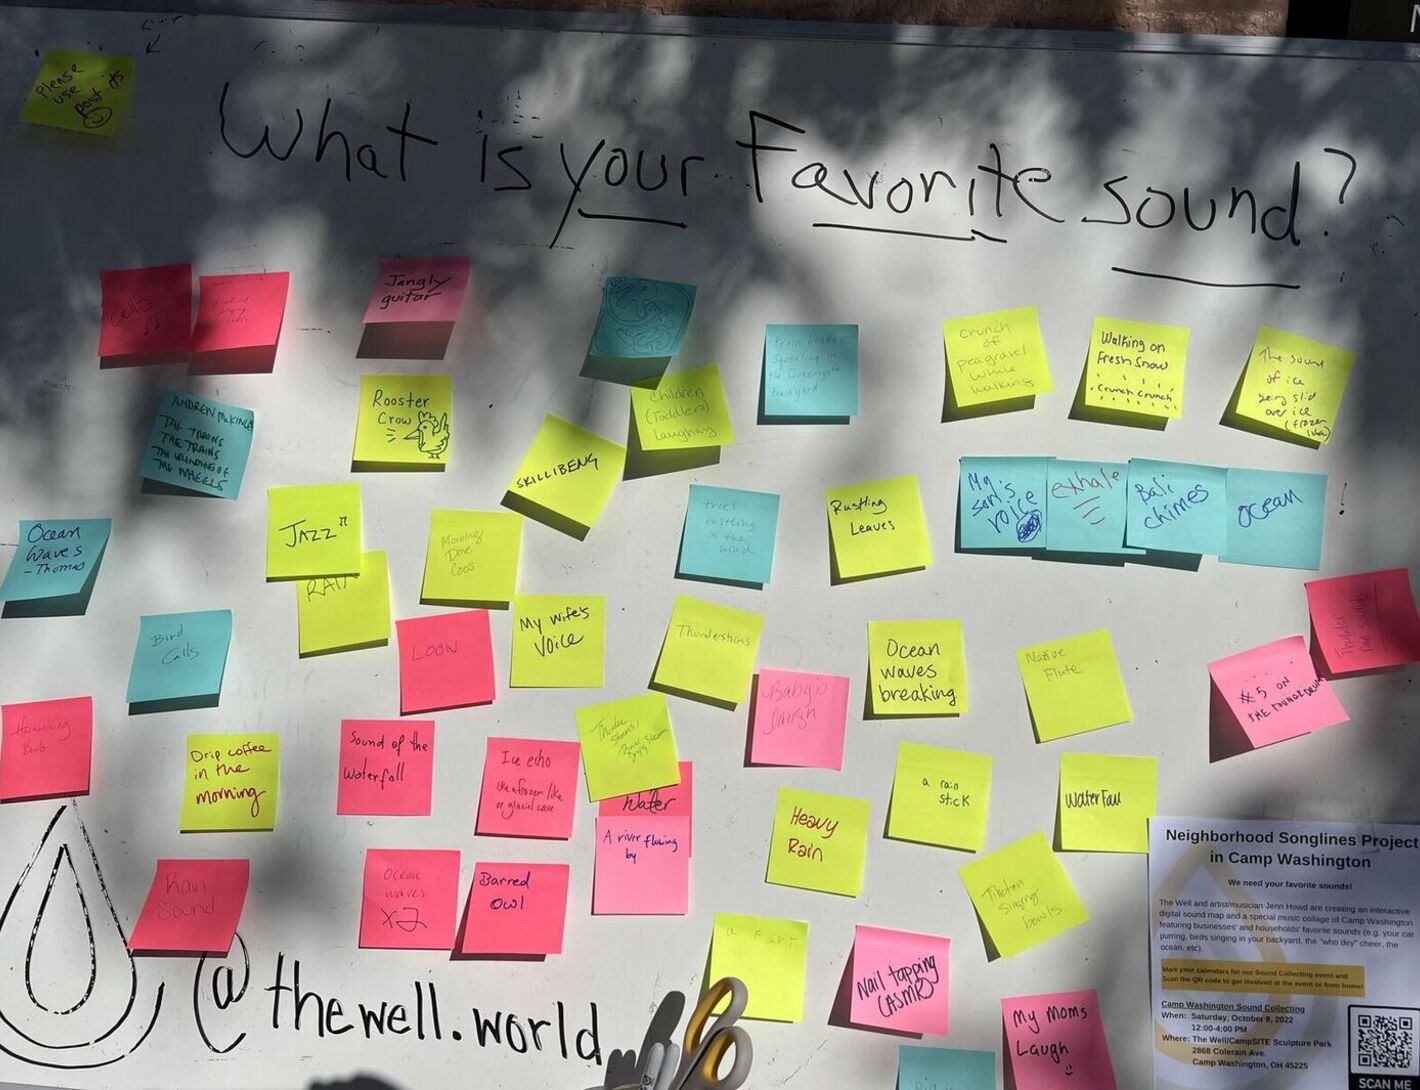 A board of sticky notes that people wrote their favorite sounds on